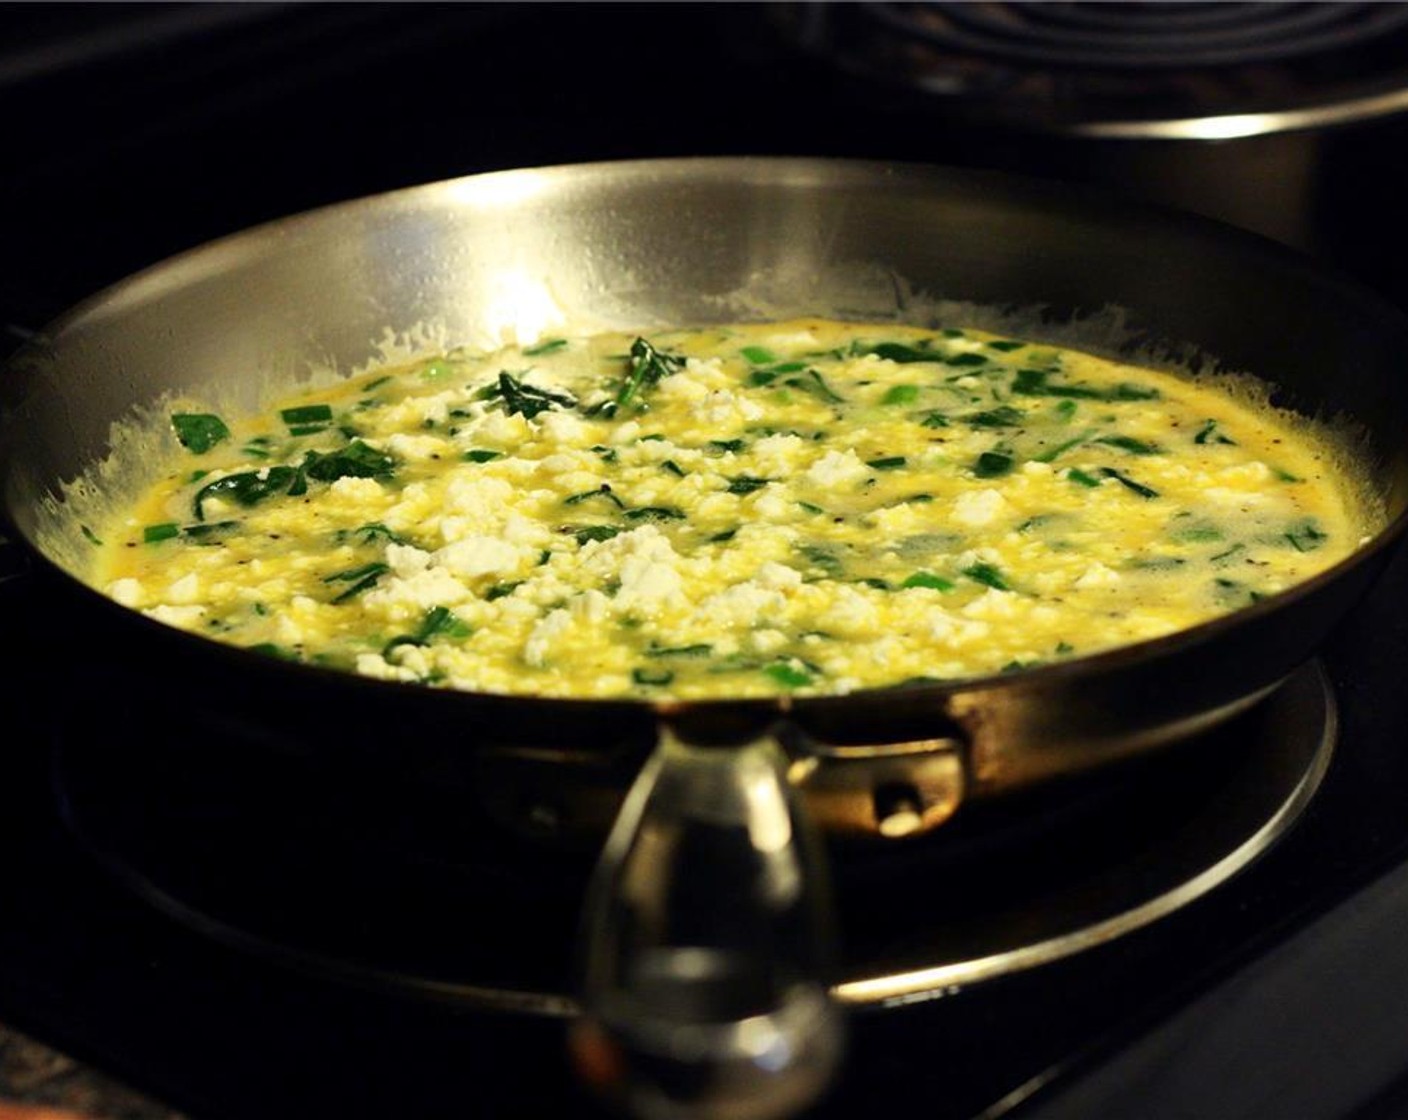 step 6 Pour in egg mixture and quickly stir so the spinach and scallions are evenly distributed. From this point on, do not stir the mixture. Sprinkle the Feta Cheese evenly over the top of the eggs.